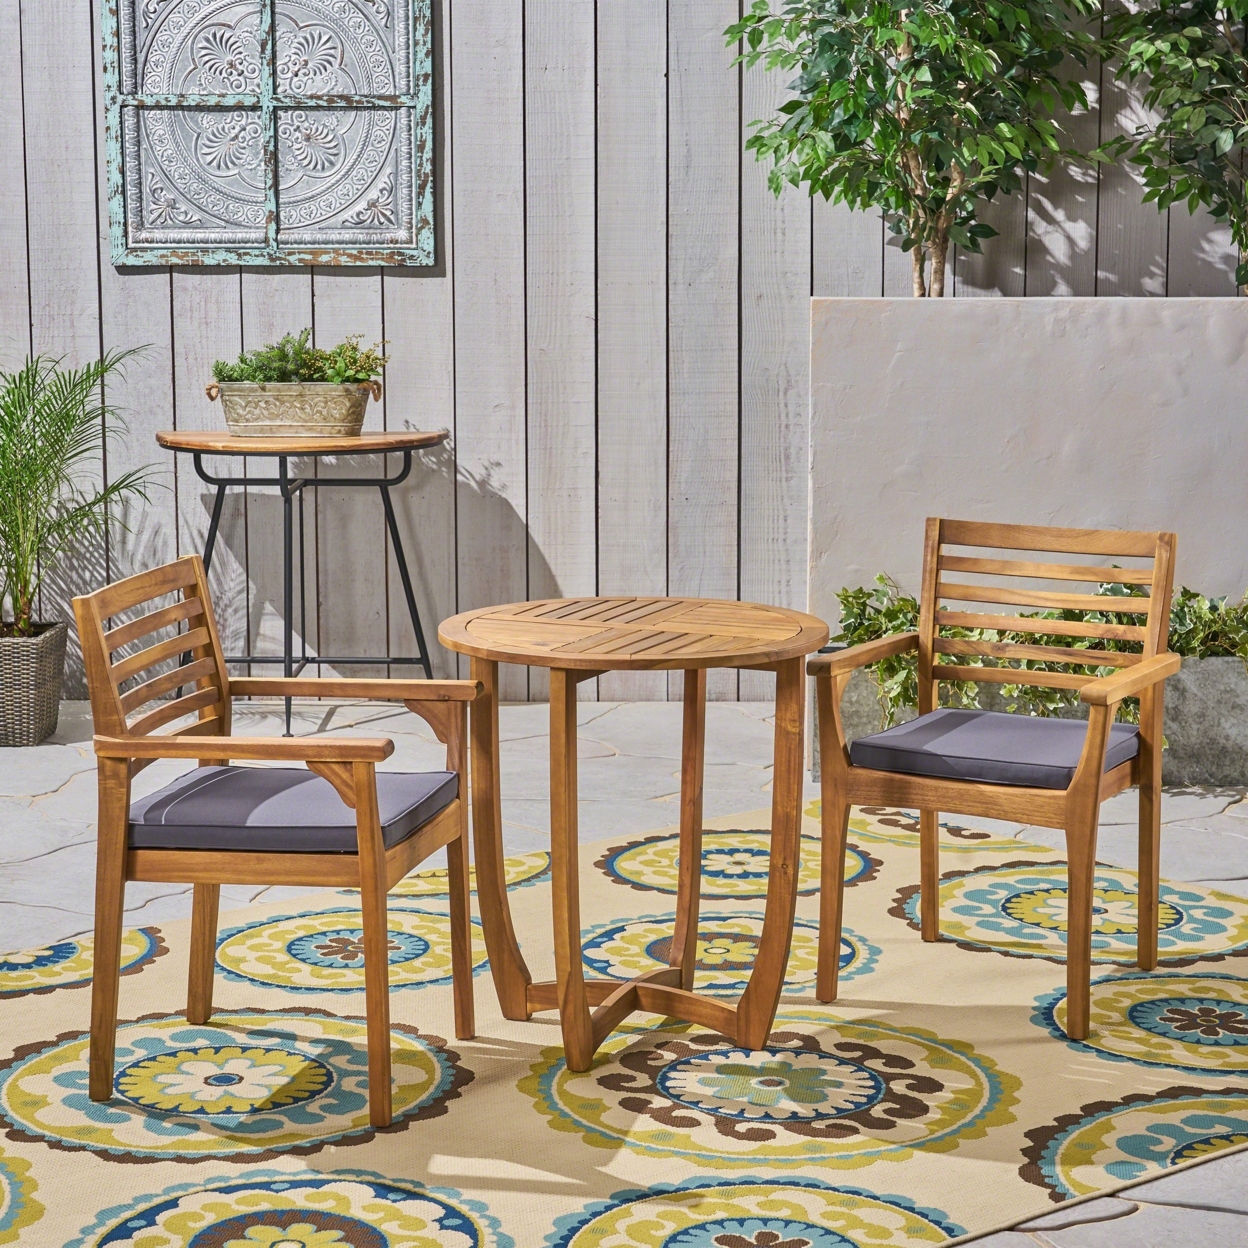 Phoenix Outdoor Acacia 2-Seater Bistro Set With Cushions And 28 Round Table With Closed Legs - Teak